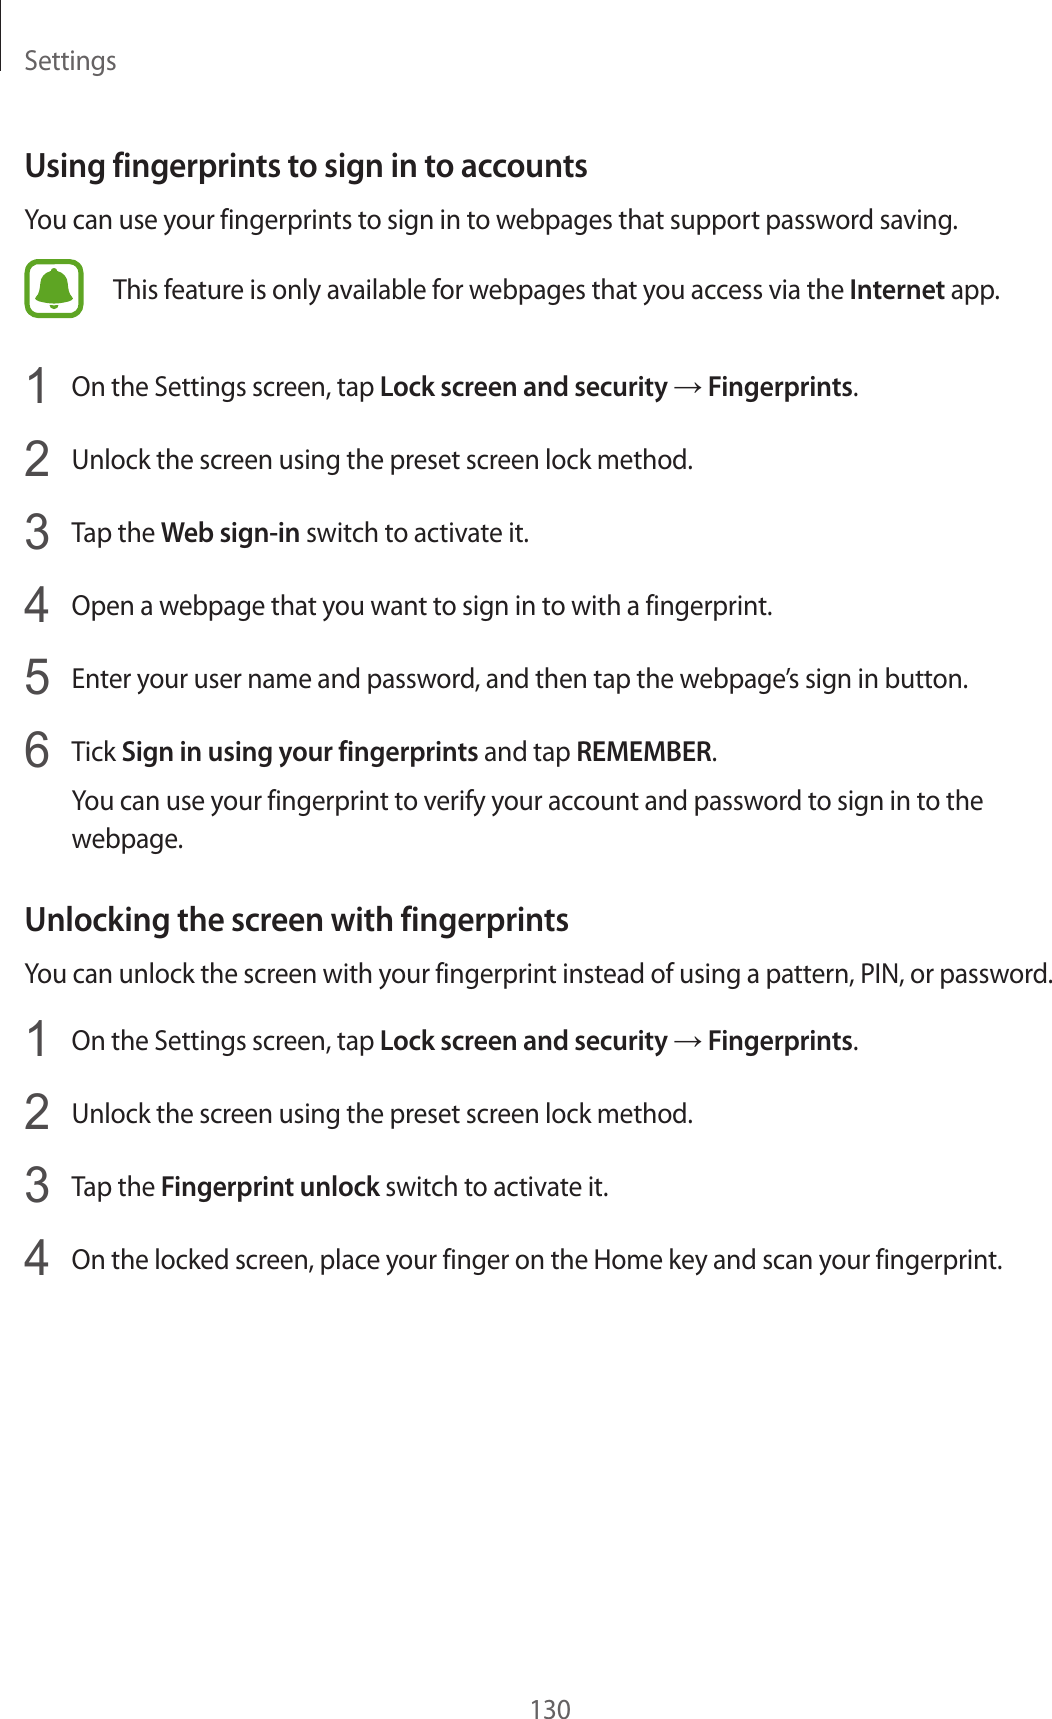 Settings130Using fingerprints to sign in to accountsYou can use your fingerprints to sign in to webpages that support password saving.This feature is only available for webpages that you access via the Internet app.1  On the Settings screen, tap Lock screen and security → Fingerprints.2  Unlock the screen using the preset screen lock method.3  Tap the Web sign-in switch to activate it.4  Open a webpage that you want to sign in to with a fingerprint.5  Enter your user name and password, and then tap the webpage’s sign in button.6  Tick Sign in using your fingerprints and tap REMEMBER.You can use your fingerprint to verify your account and password to sign in to the webpage.Unlocking the screen with fingerprintsYou can unlock the screen with your fingerprint instead of using a pattern, PIN, or password.1  On the Settings screen, tap Lock screen and security → Fingerprints.2  Unlock the screen using the preset screen lock method.3  Tap the Fingerprint unlock switch to activate it.4  On the locked screen, place your finger on the Home key and scan your fingerprint.